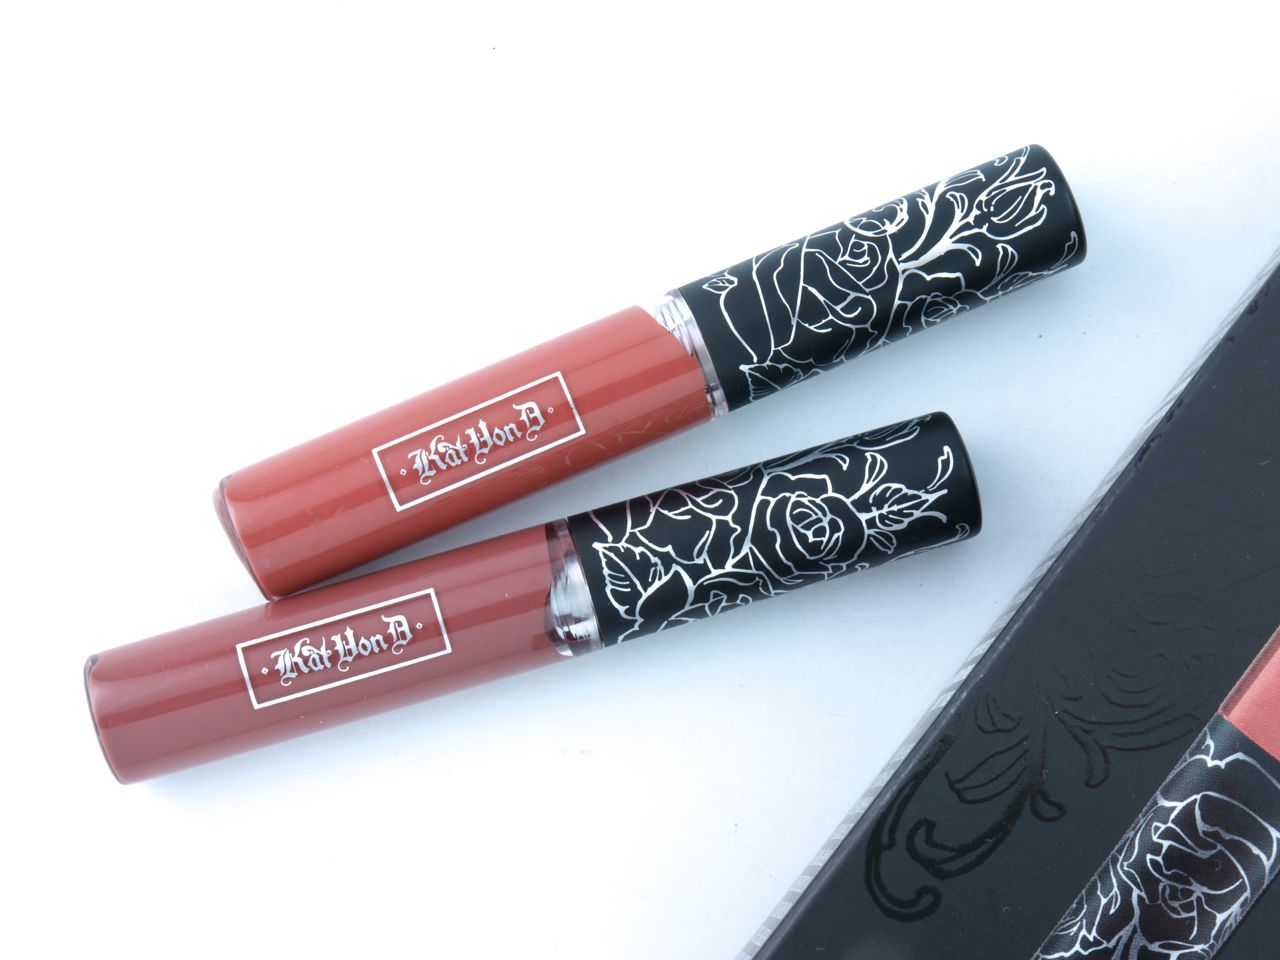 Kat Von D Holiday 2015 Lolita Lip Duo: Review and Swatches